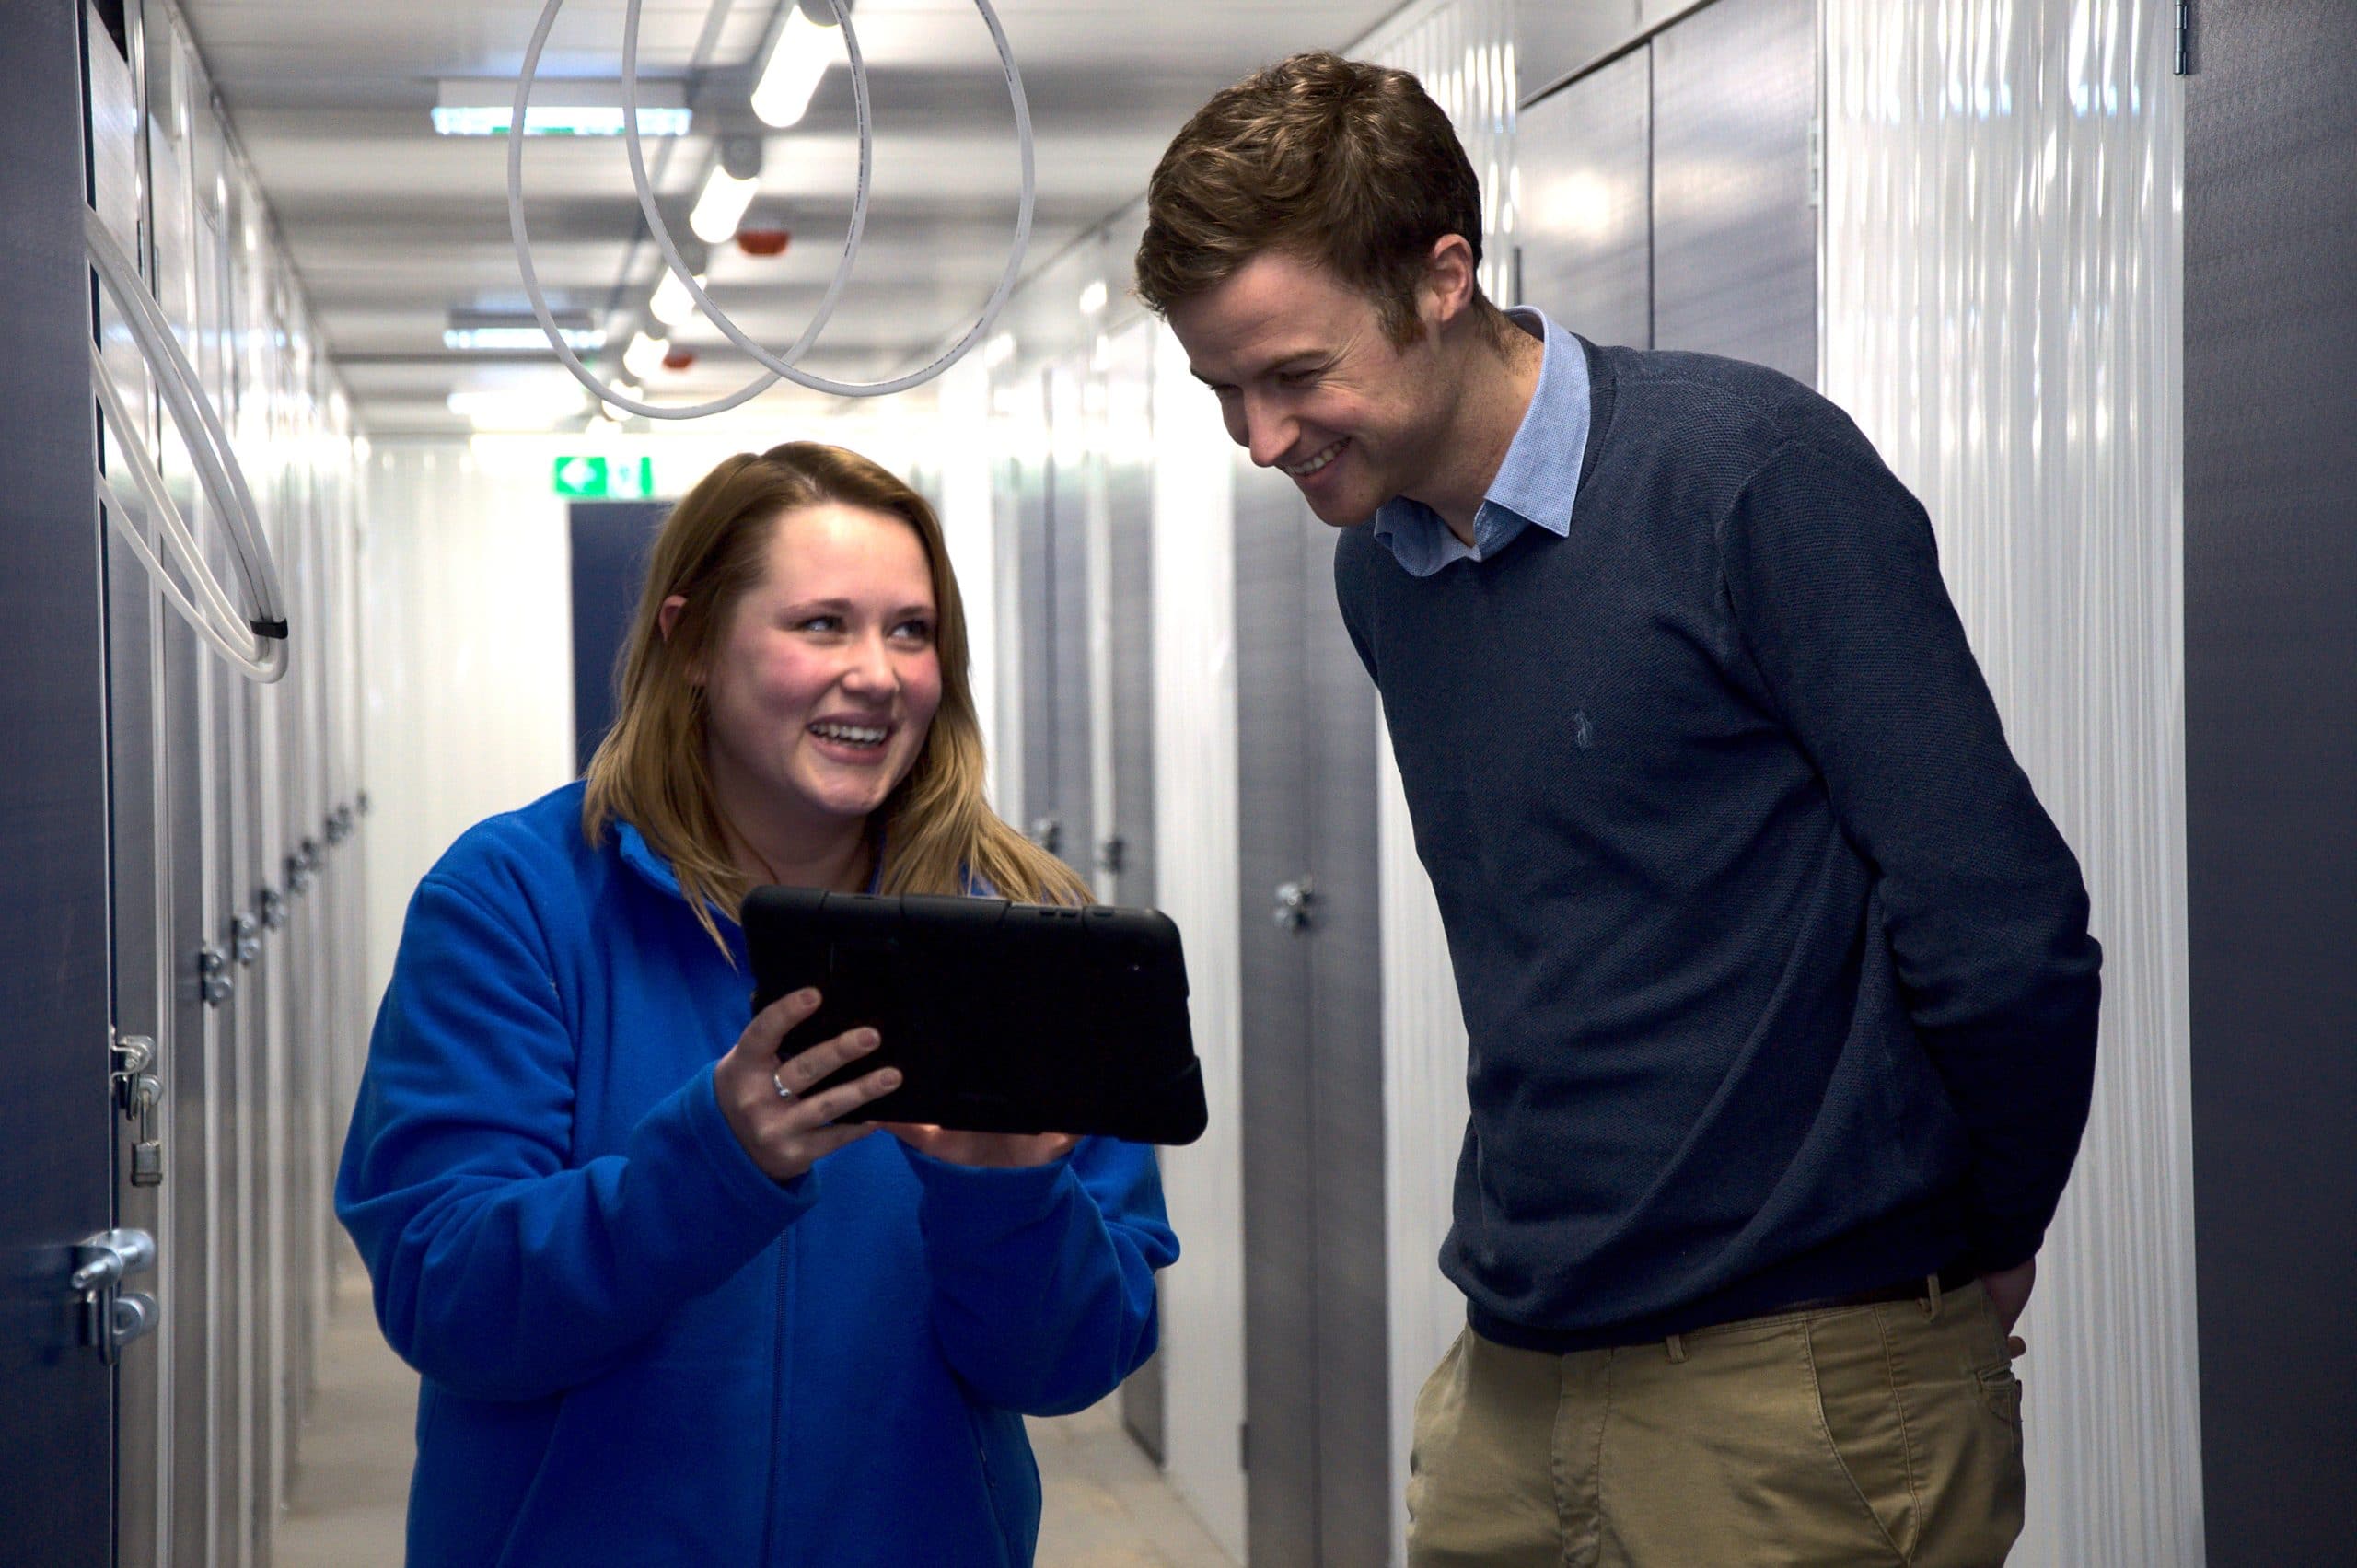 Woman and man smiling over iPad in storage facility